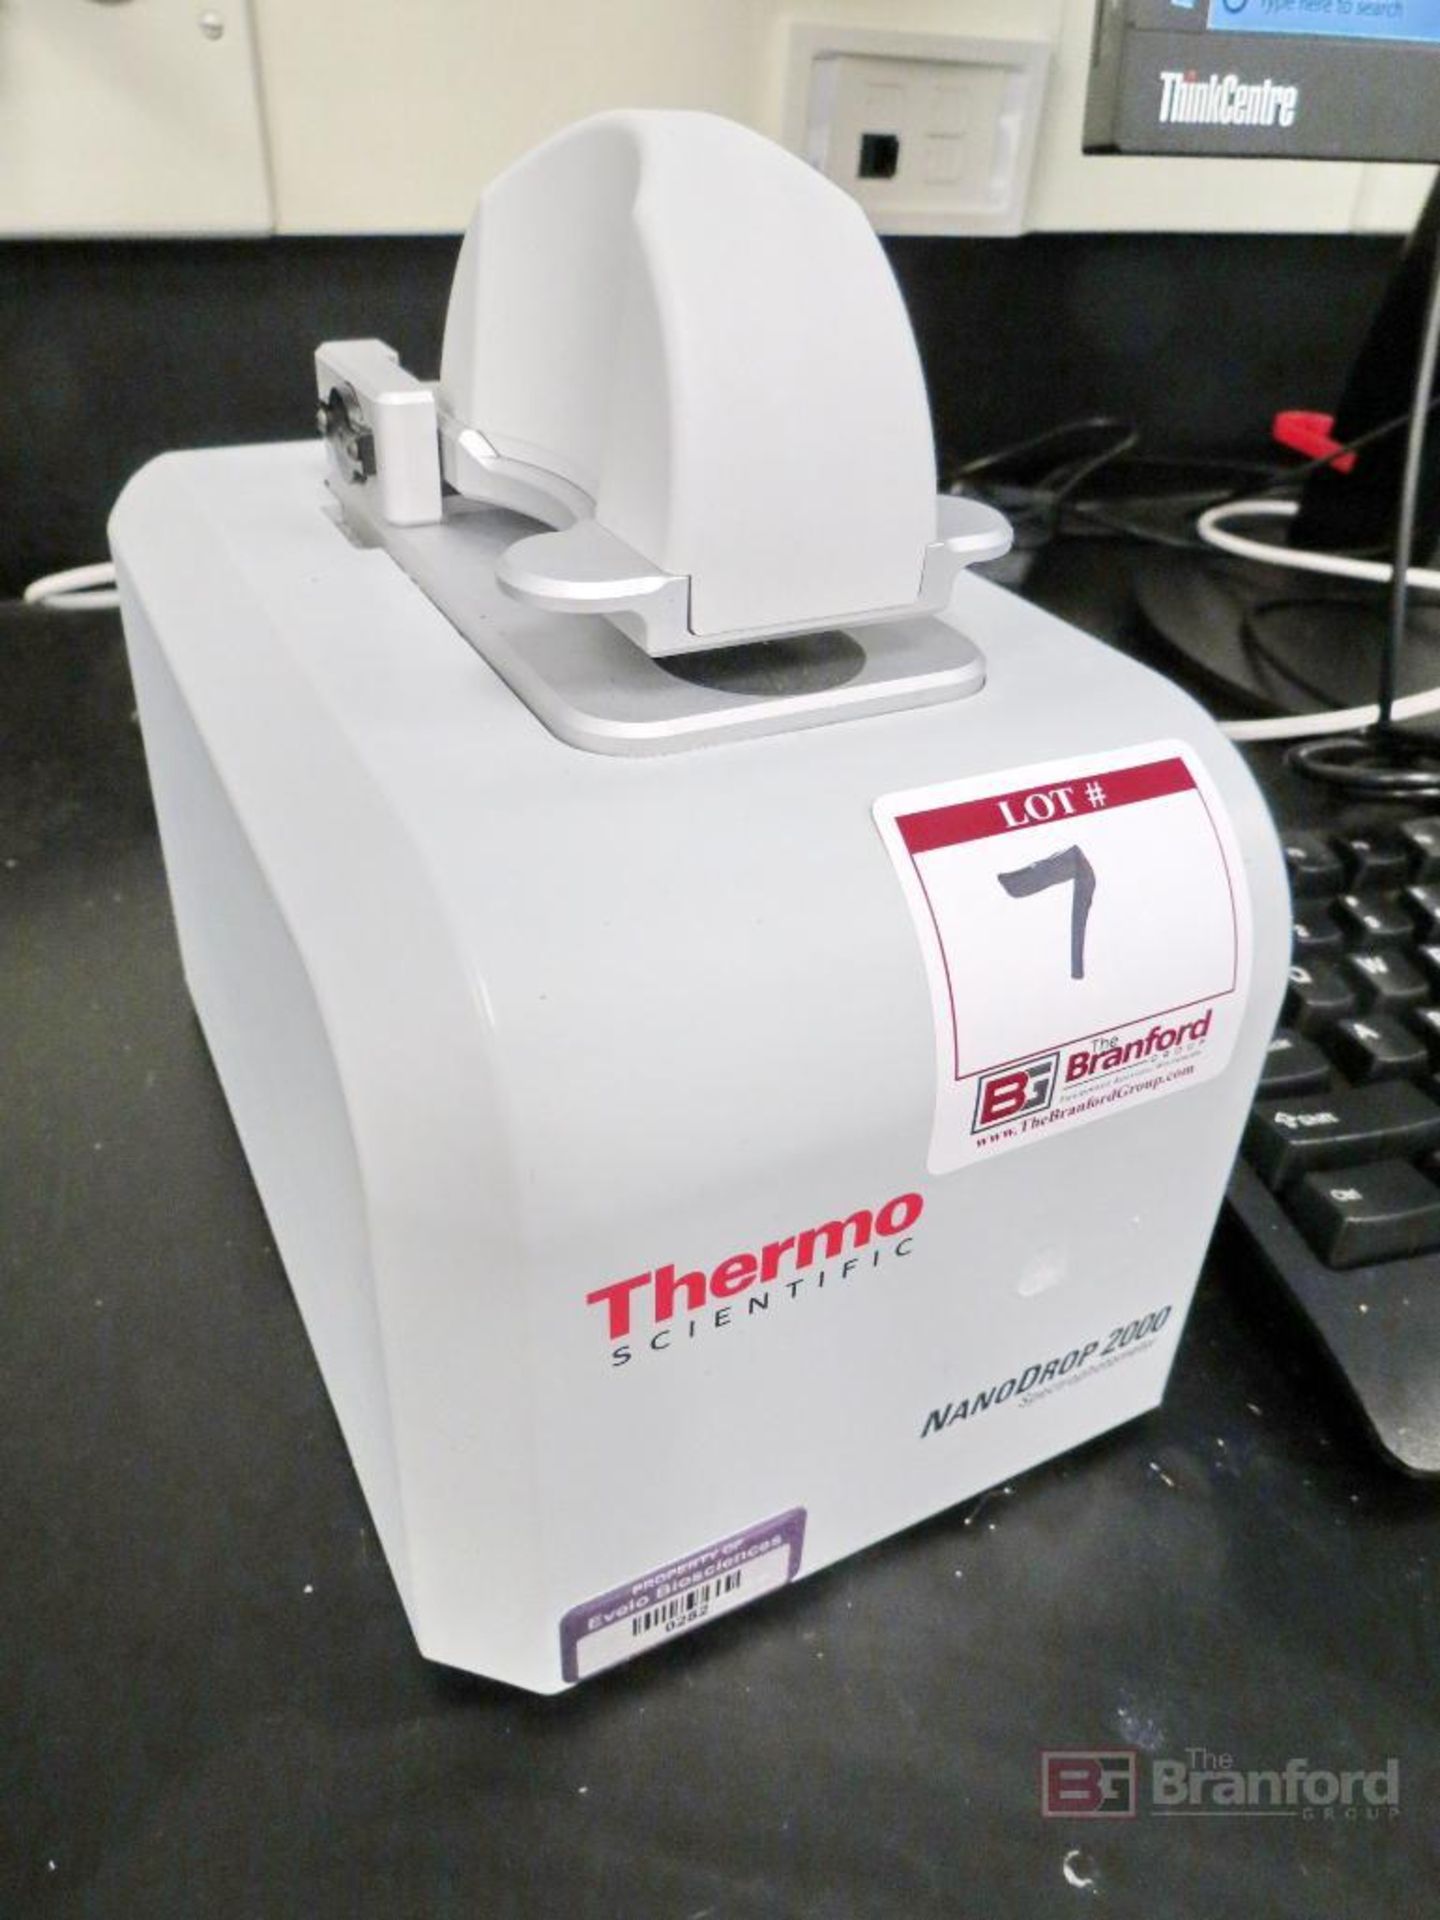 Thermo NanoDrop 2000 Spectrophotometer - Image 2 of 5